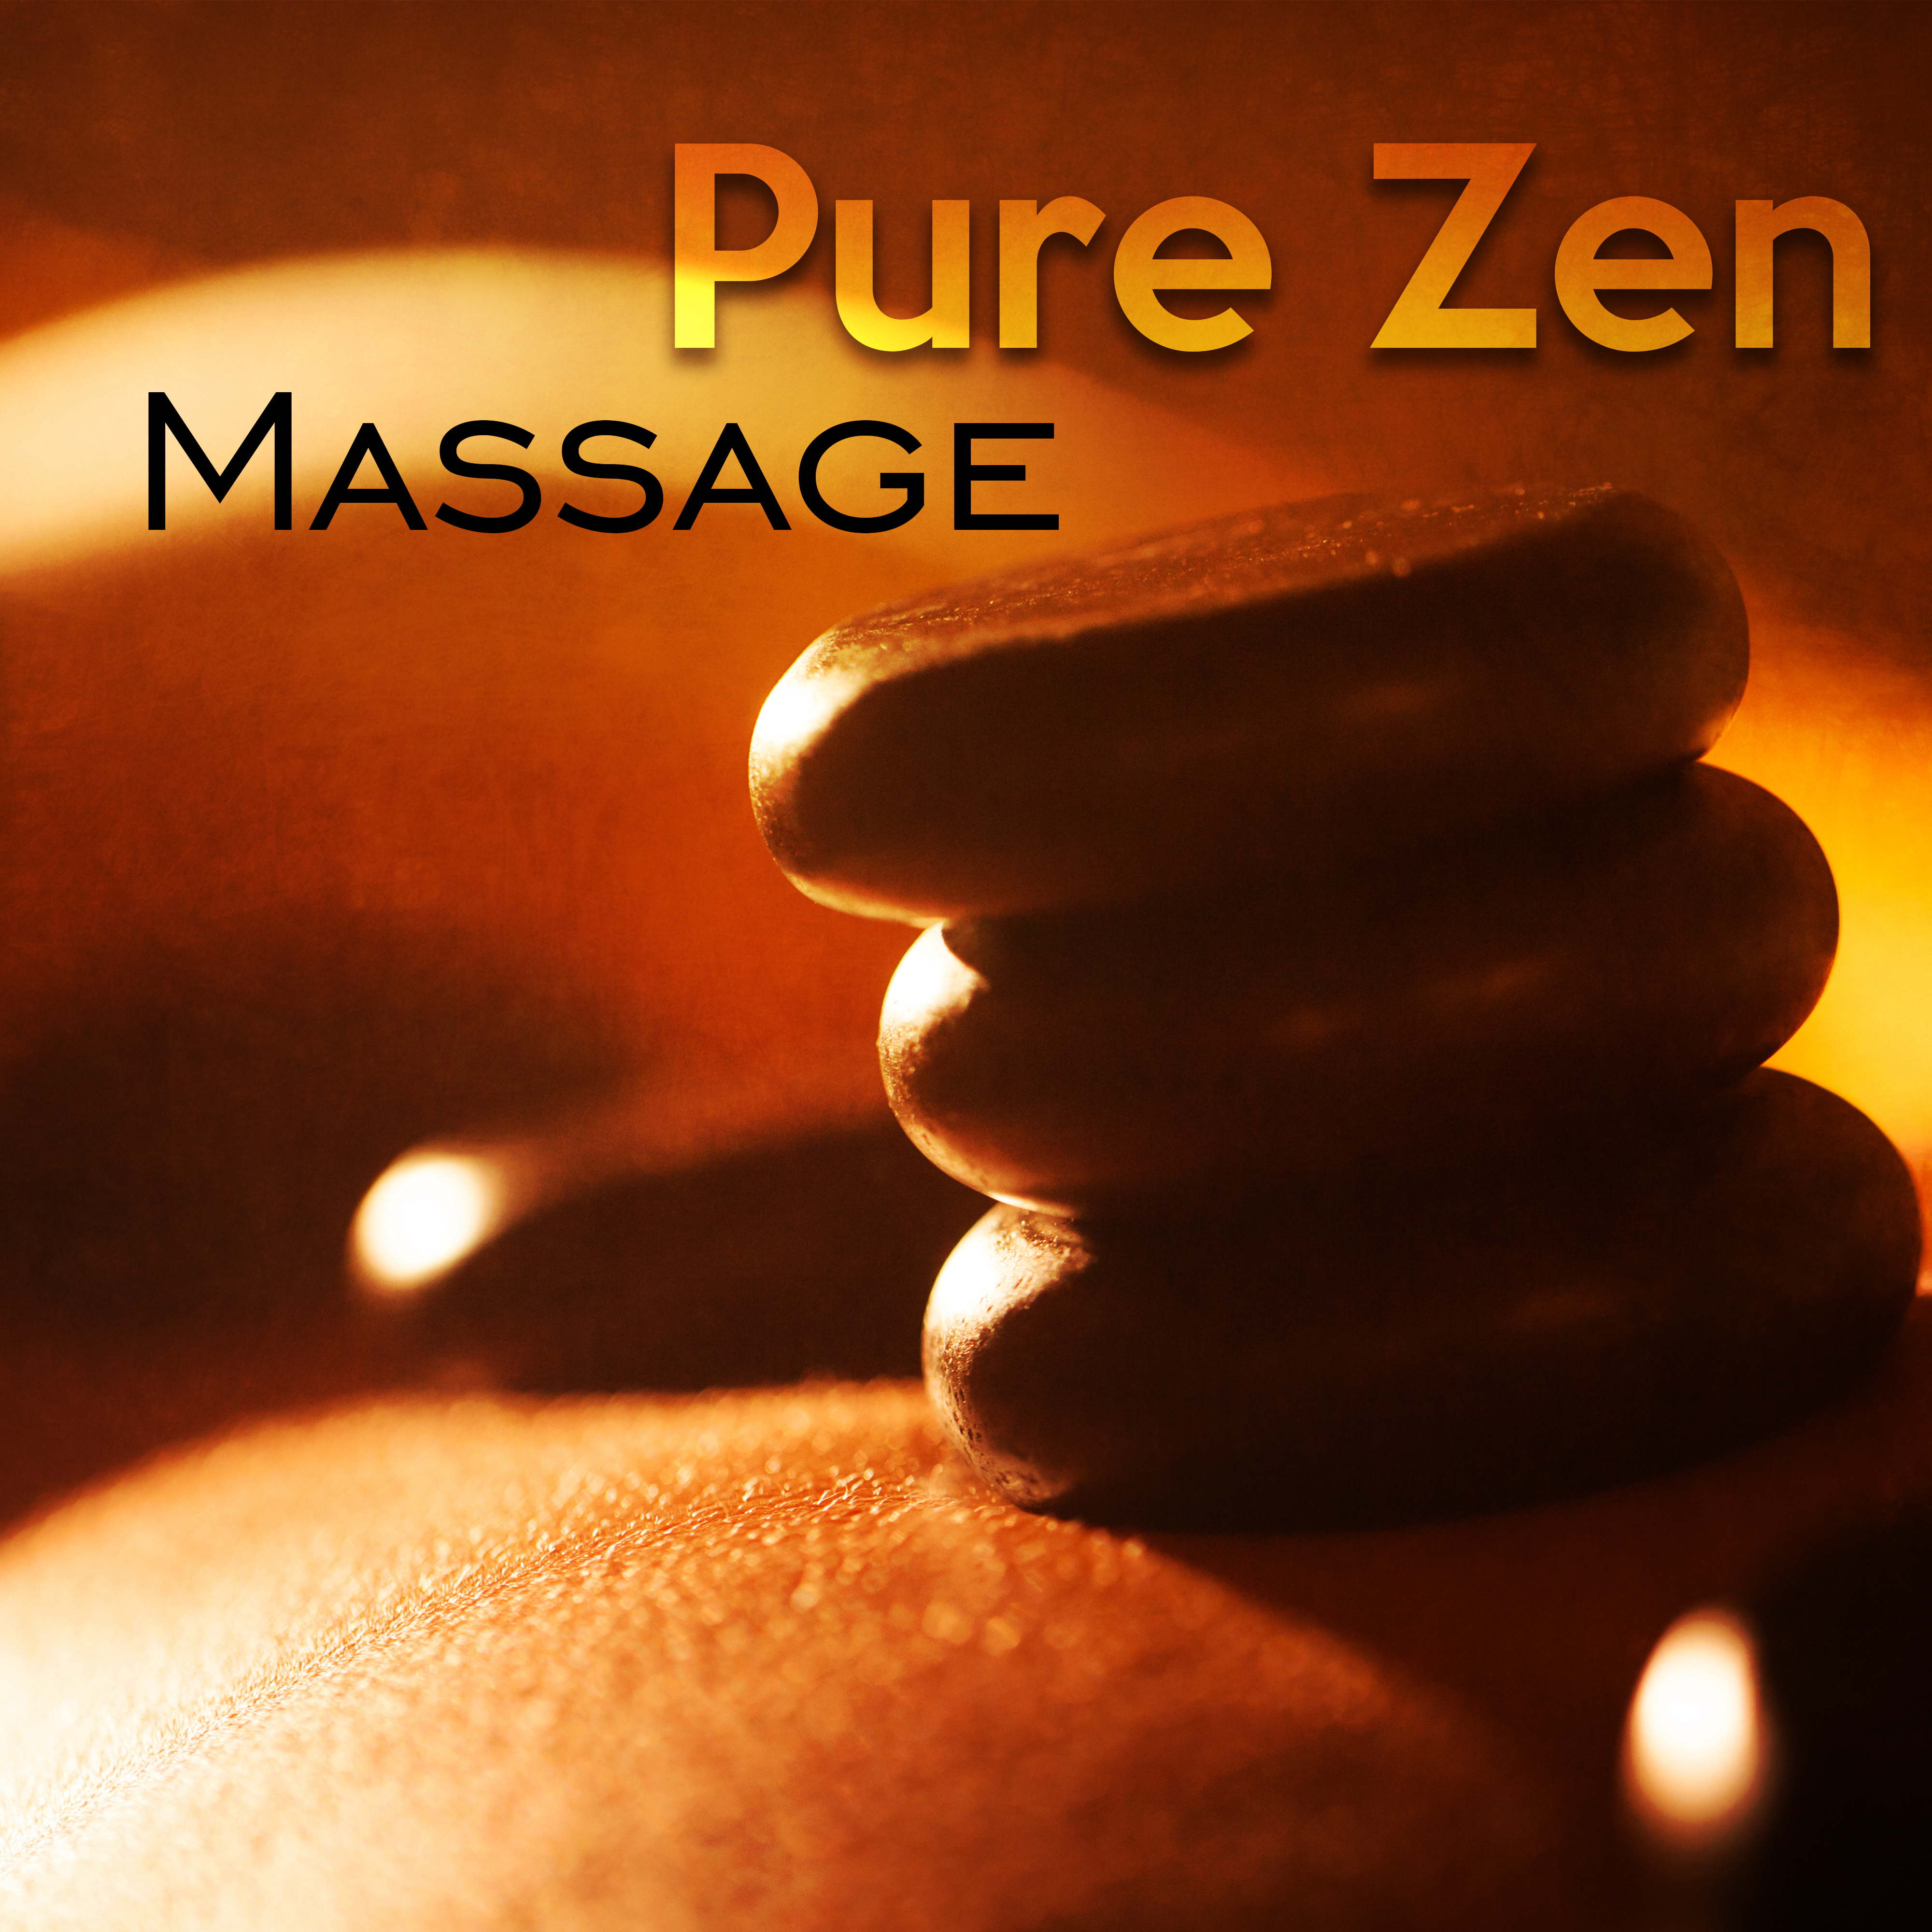 Pure Zen Massage – Relaxing Music for Massage Therapy, Wellness, Yoga, Zen, New Age